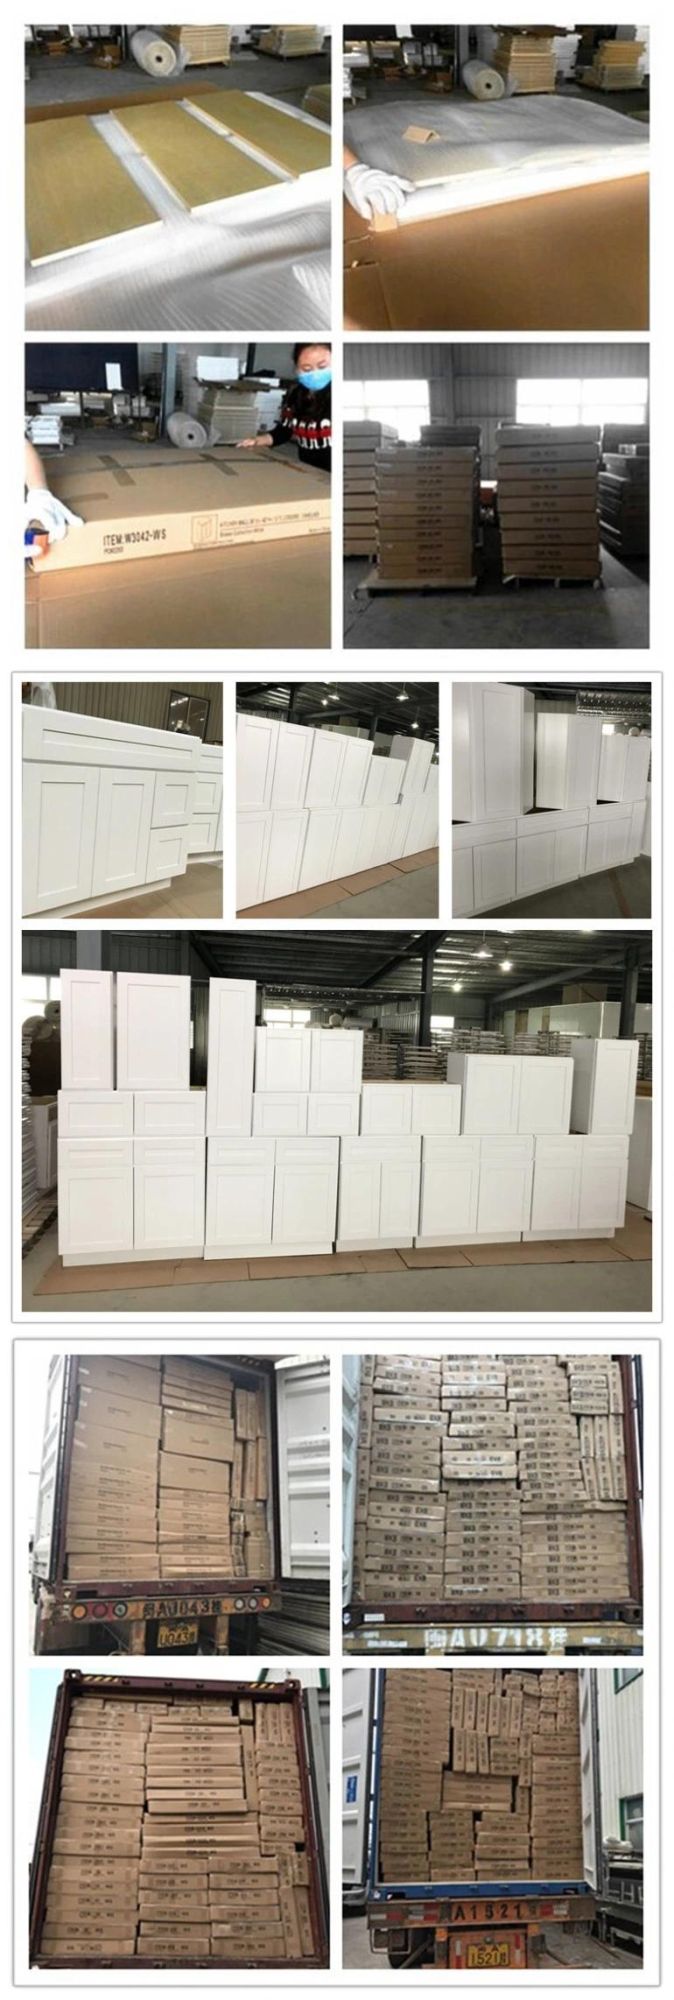 Solid Wood L Shaped Modern White Modular Kitchen Cabinet with Wall Cupboard